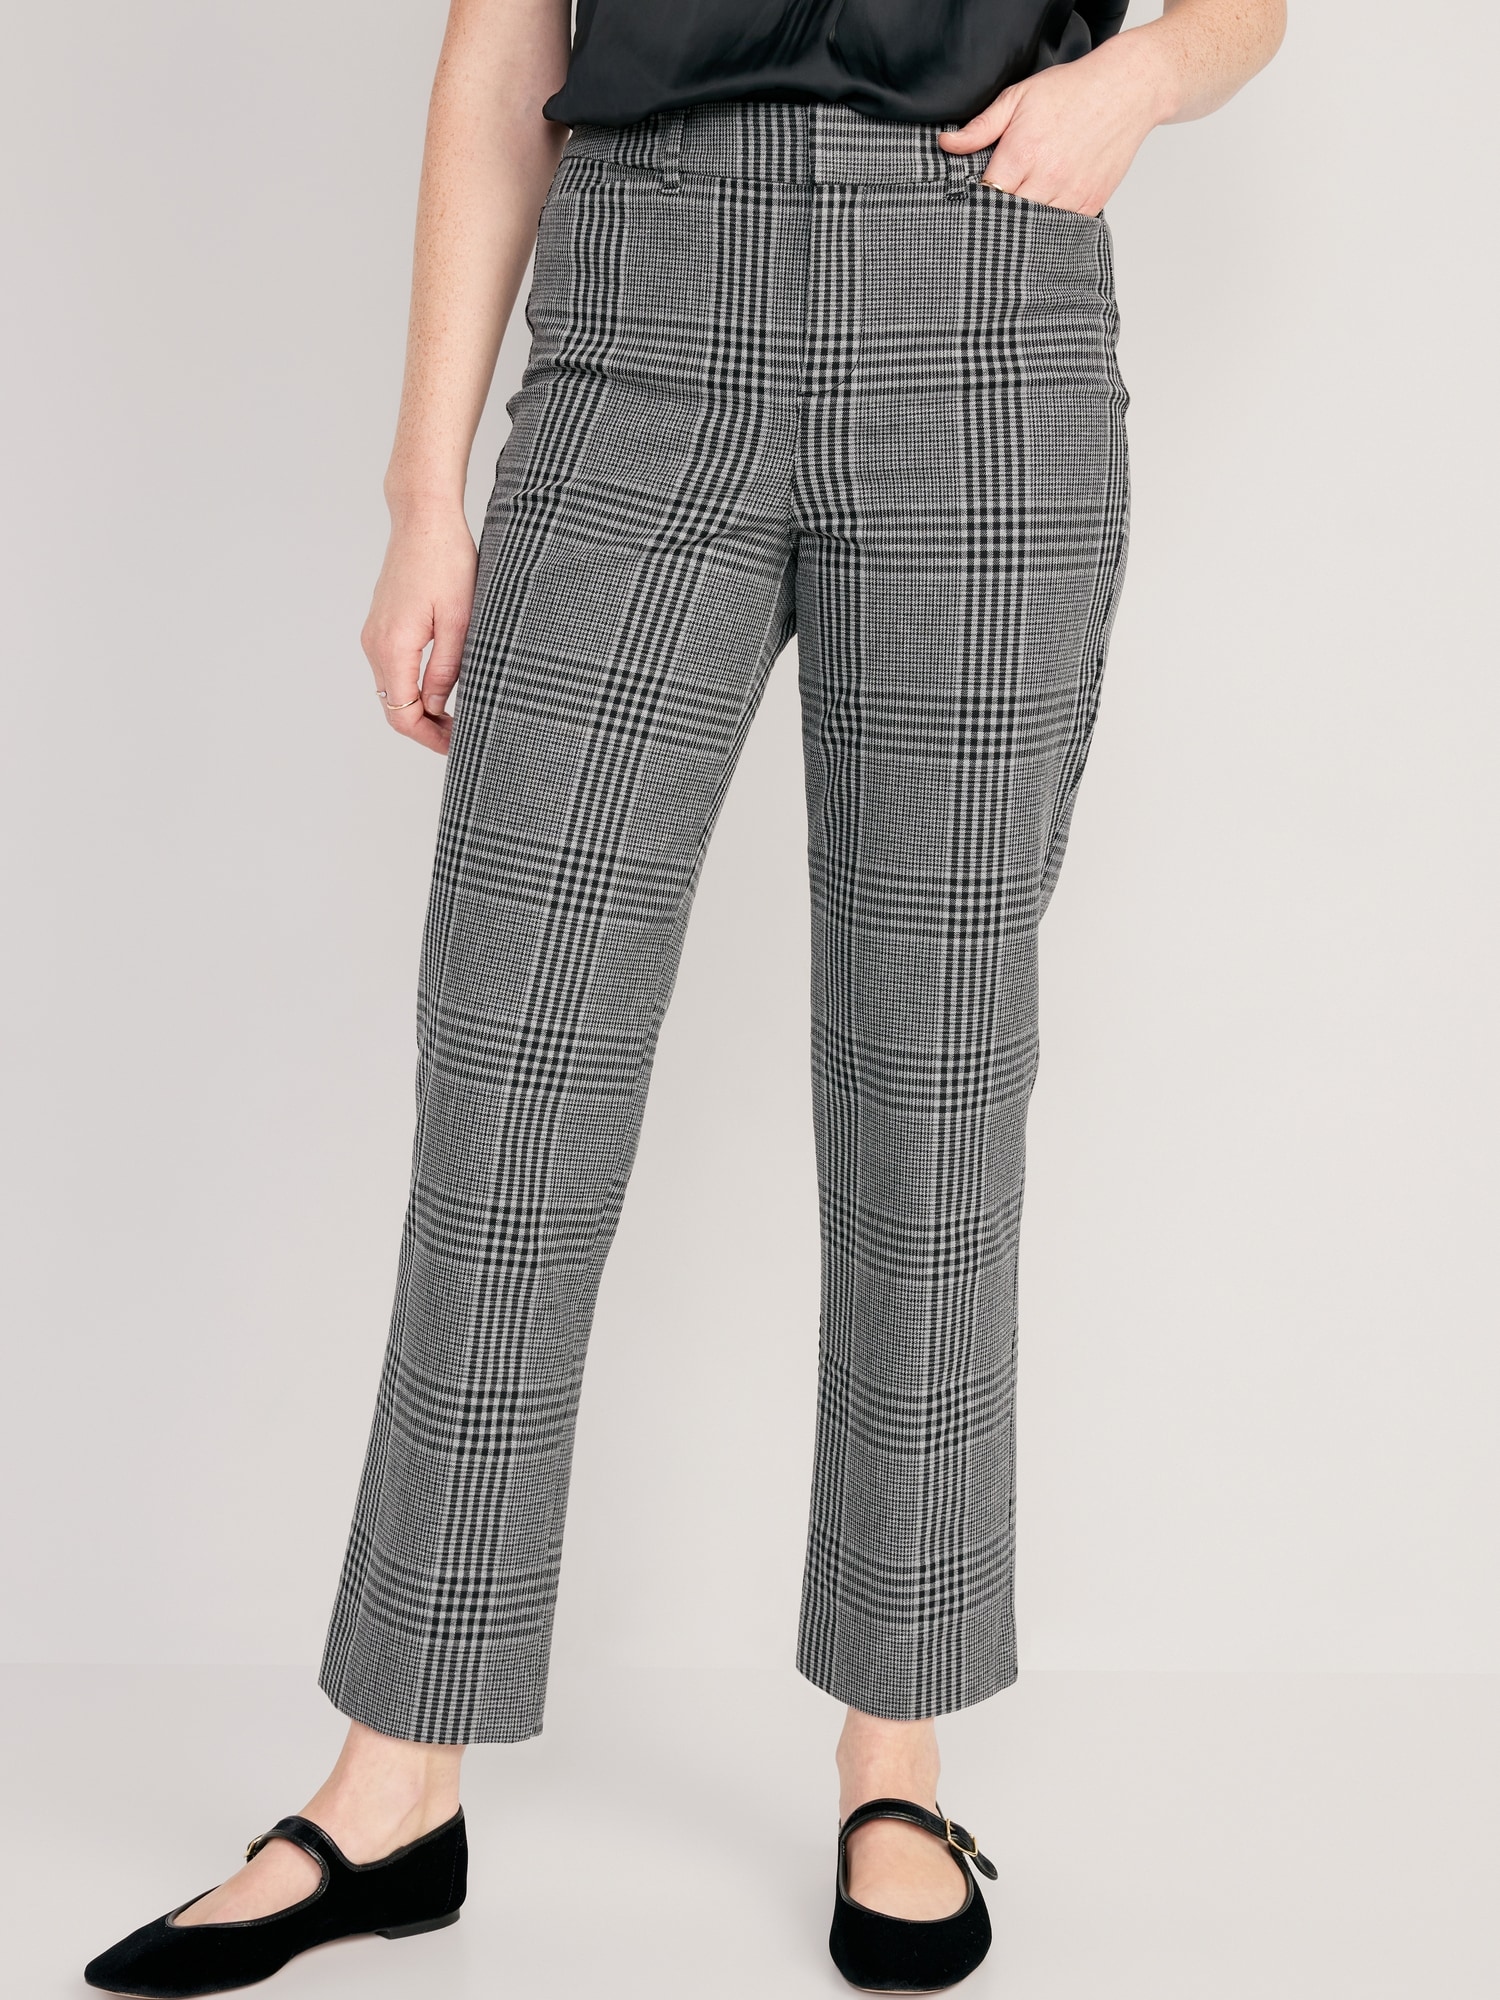 Old navy pixie pants $20 today , online & in-store : r